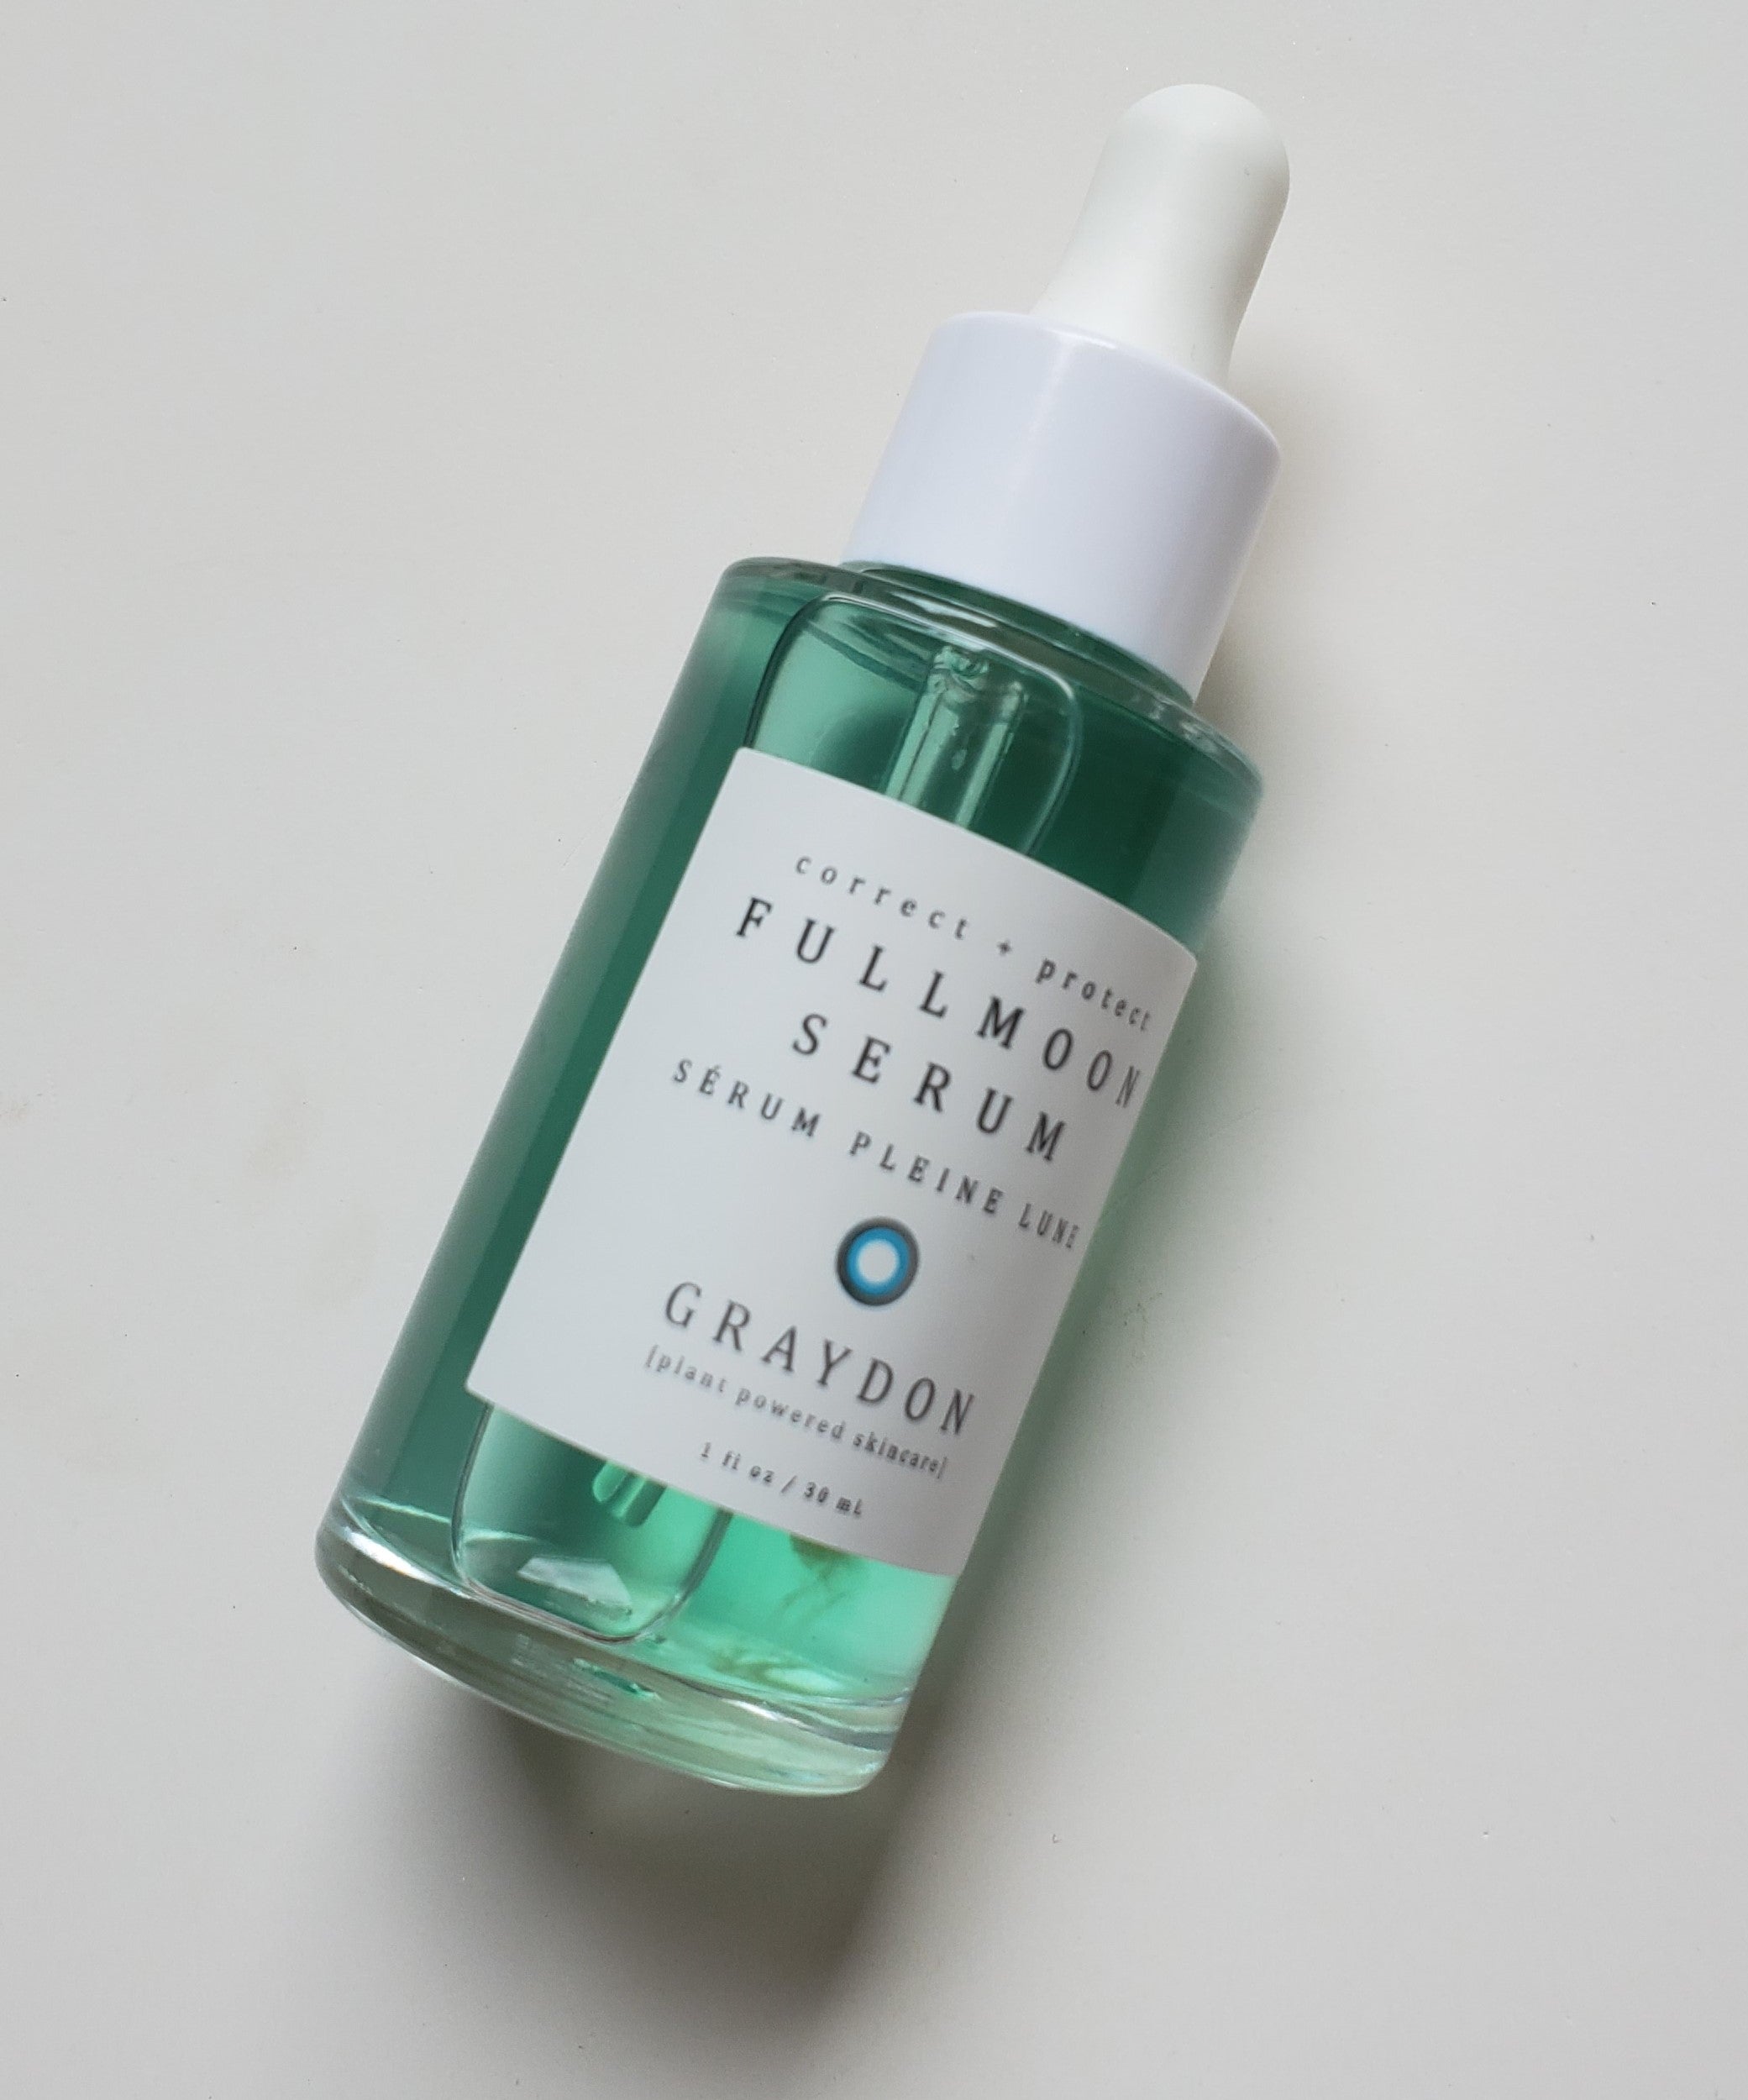 Review, Ingredients, Photos, Skincare Trend, 2019, 2020: Graydon, Fullmoon Serum, Best Anti-Aging Products, How To Achieve Radiant Skin